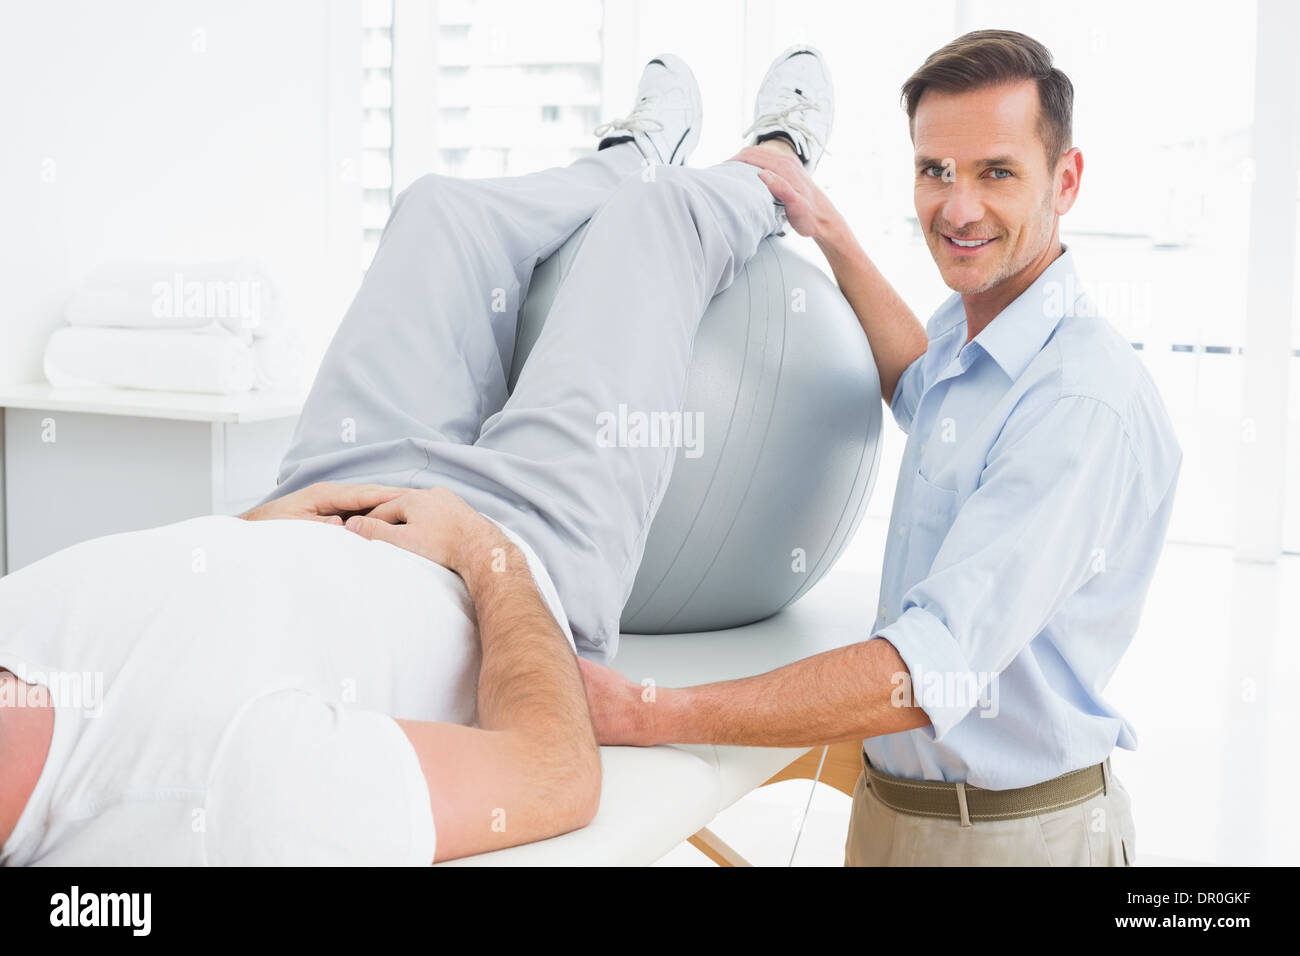 Physical therapist assisting man with yoga ball Stock Photo